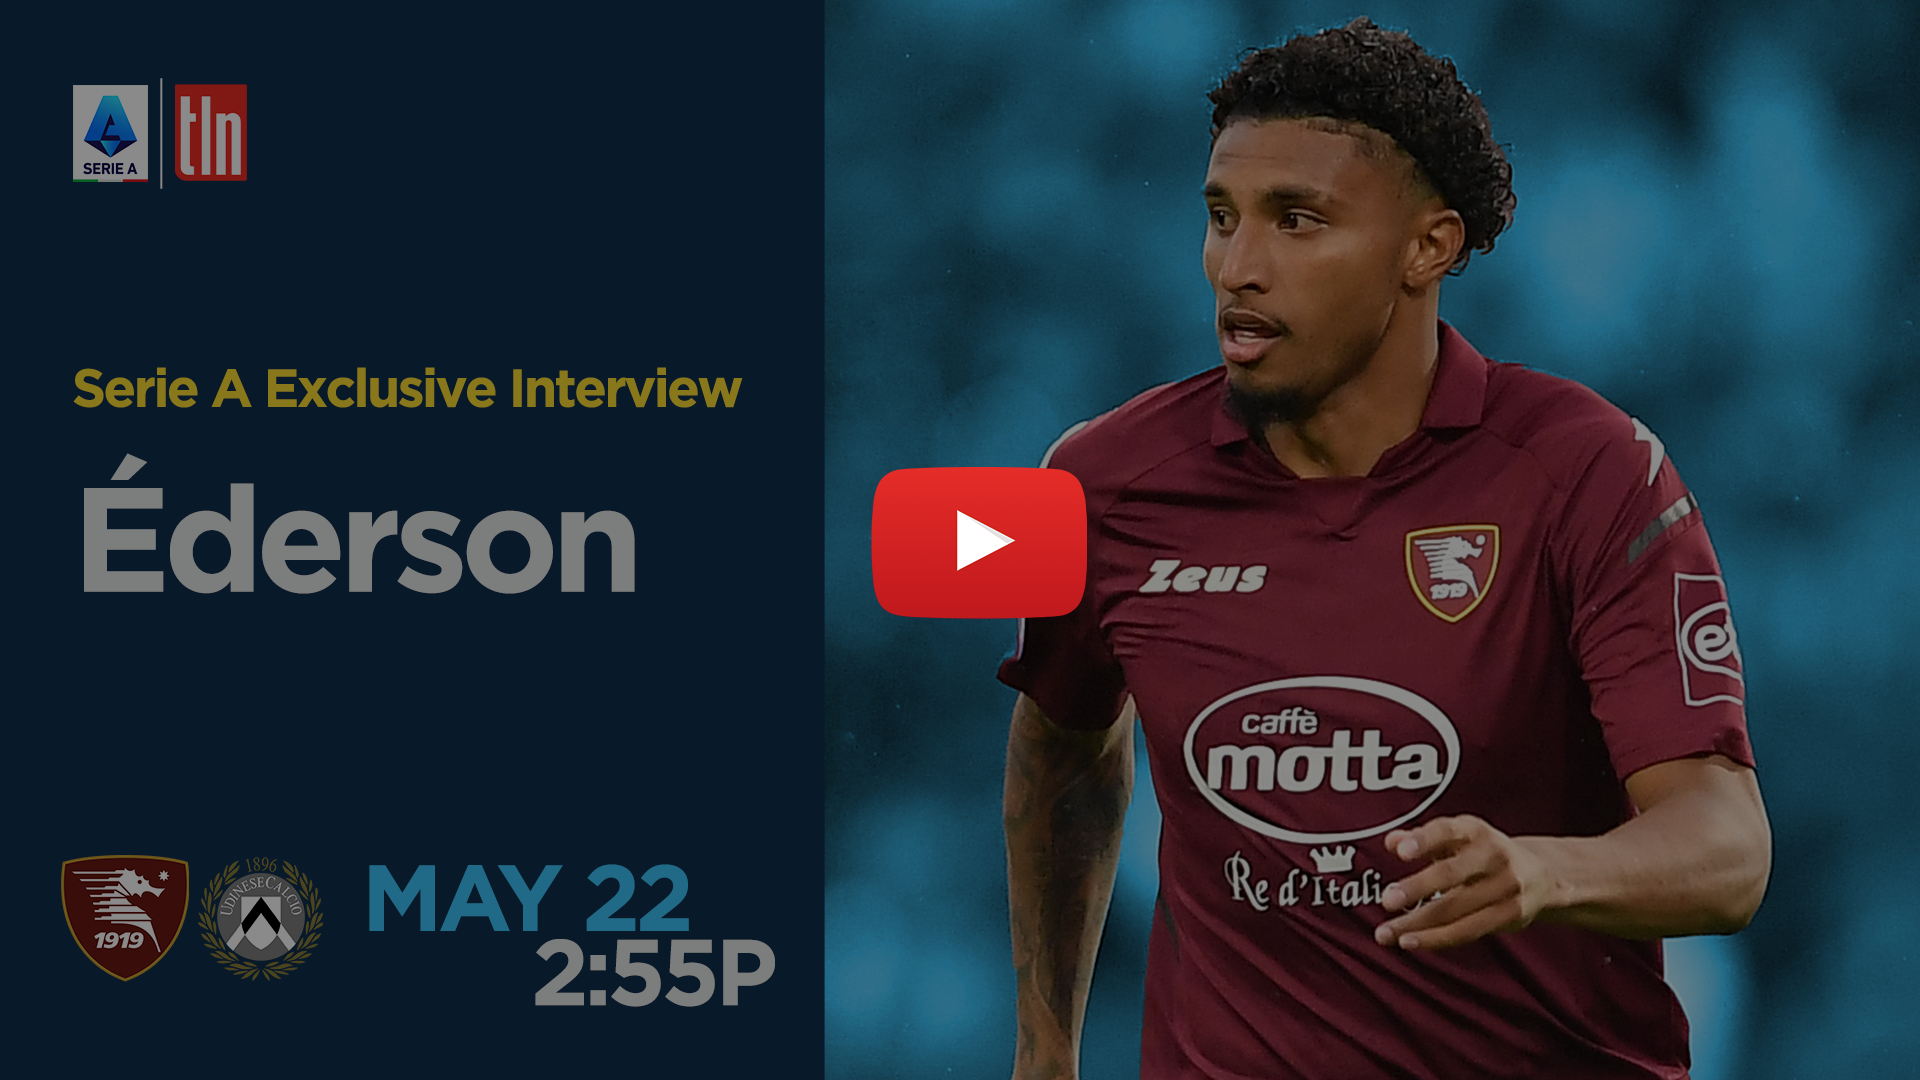 In this exclusive interview between Serie A and Éderson, the central midfielder speaks about his career and previews Salernitana vs Udinese, taking place on 22 May 2022.